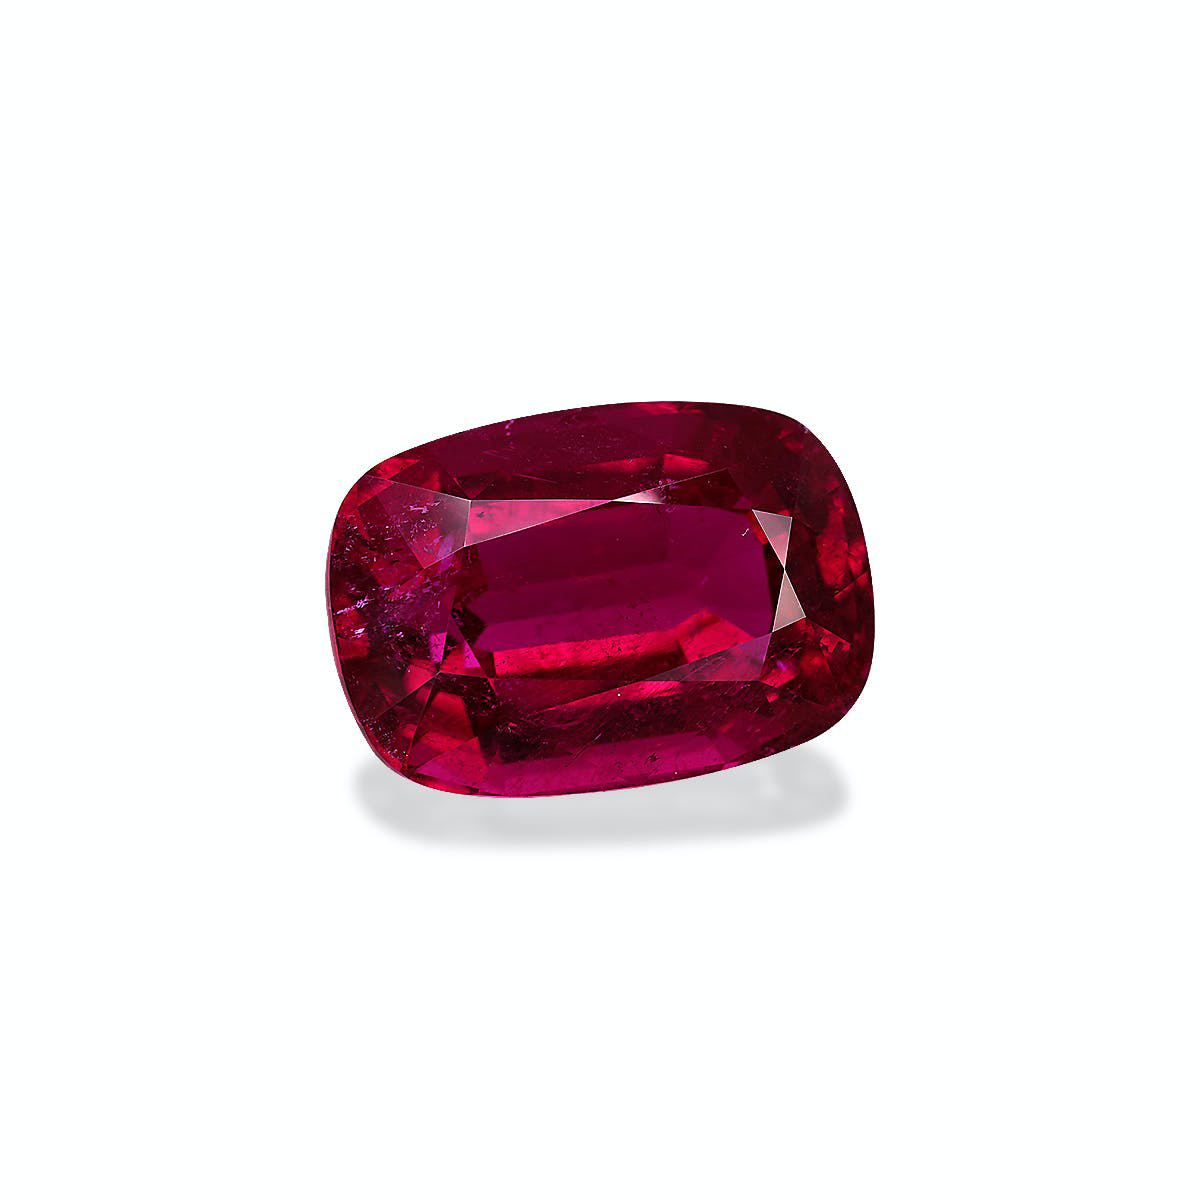 Picture of Rose Red Rubellite Tourmaline 83.24ct (RL1125)